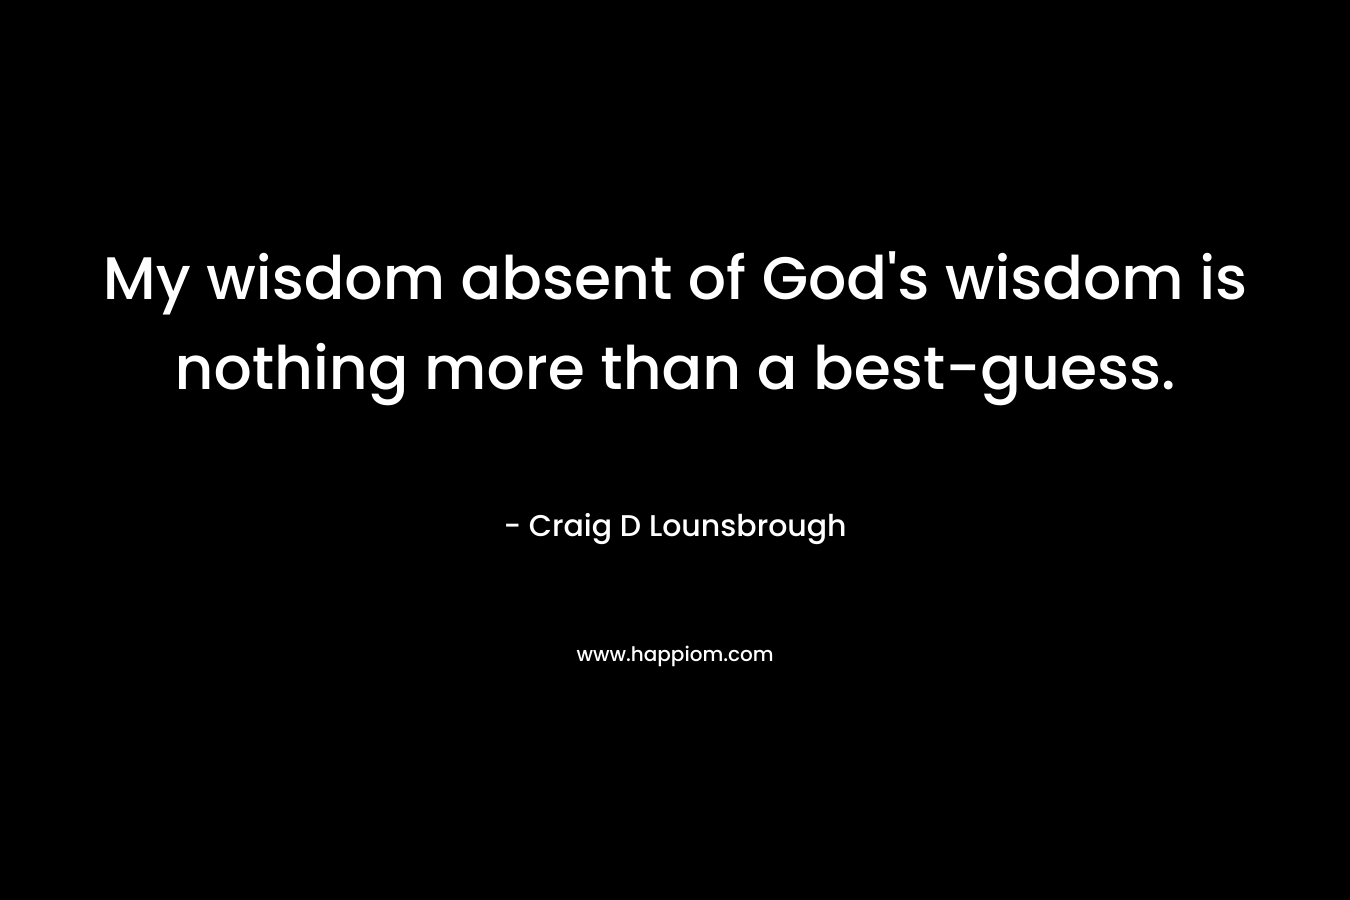 My wisdom absent of God’s wisdom is nothing more than a best-guess. – Craig D Lounsbrough